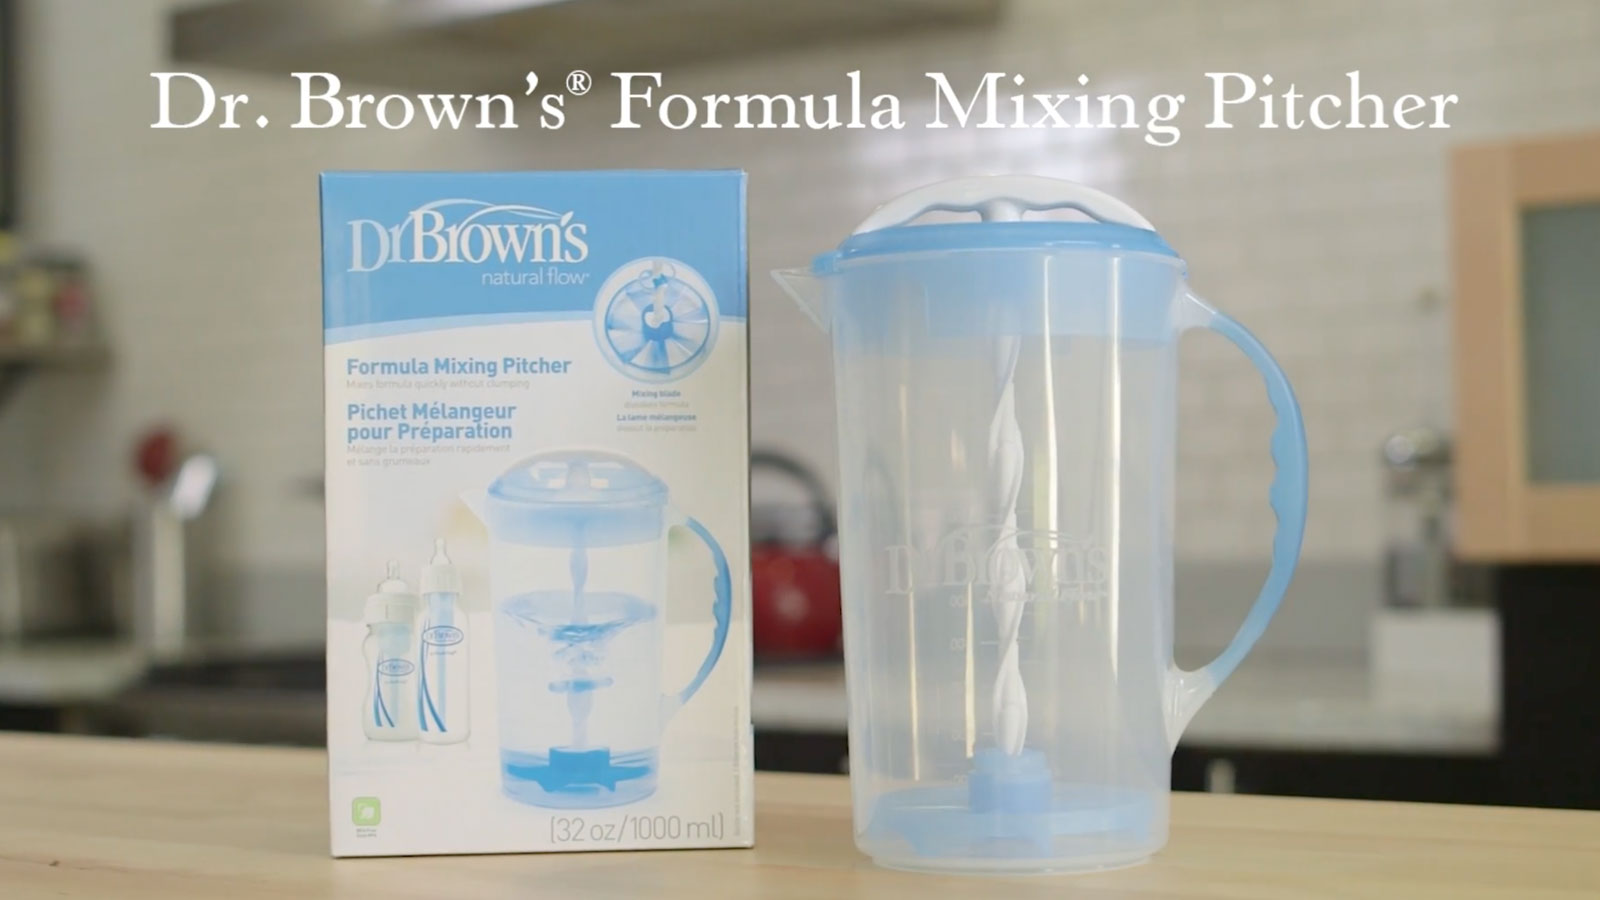 Dr. Brown's Dr. Brown’s Natural Flow® Formula Mixing Pitcher